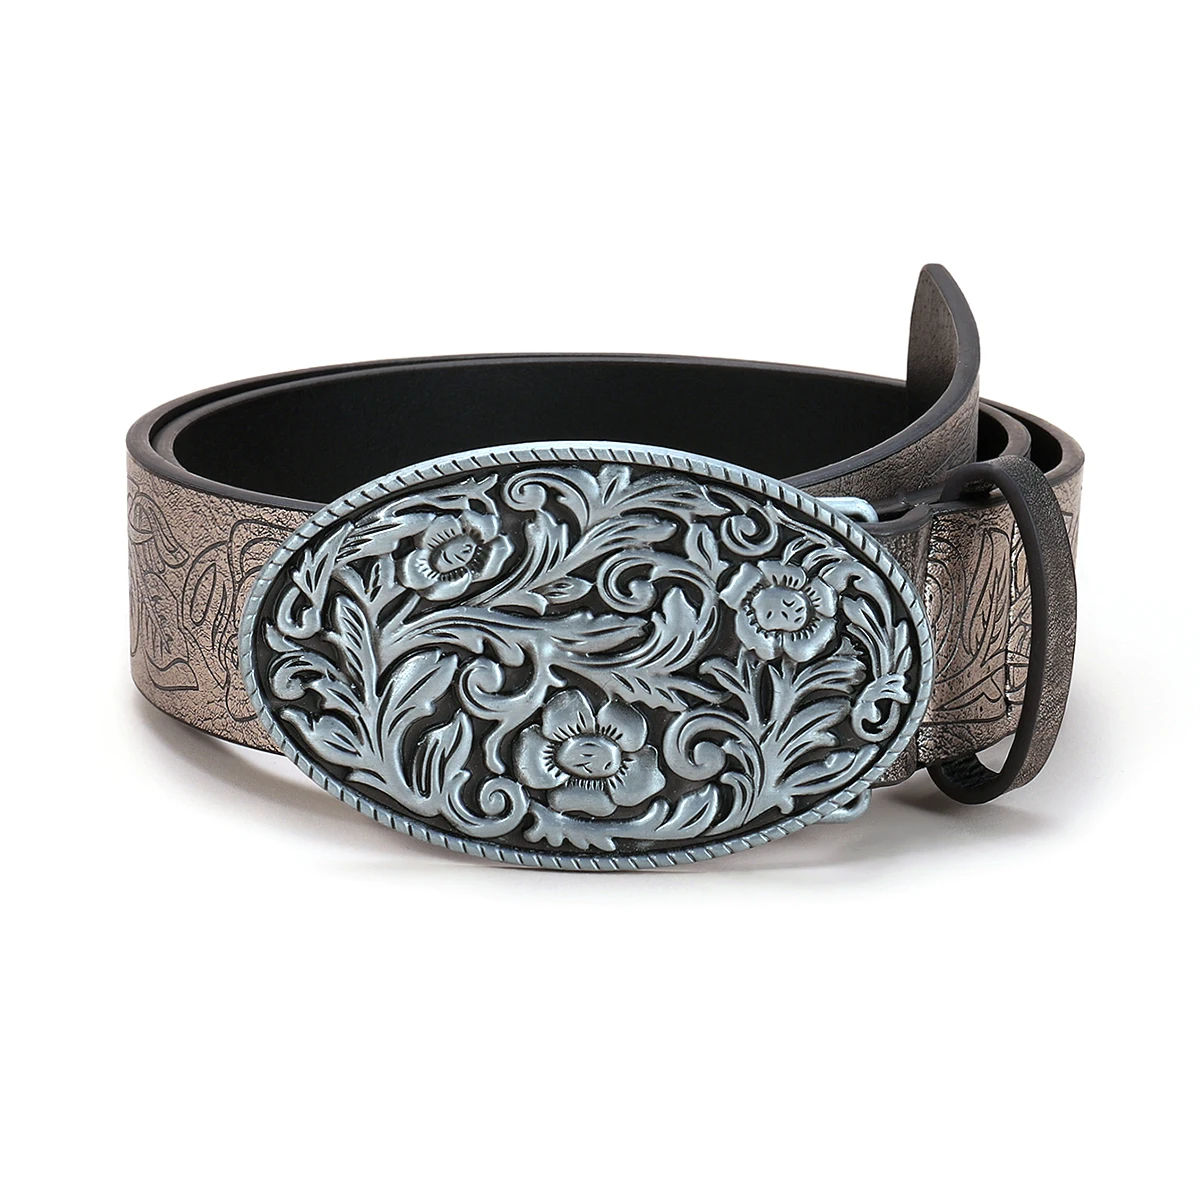 Fashion Classic Embossed Strap Western Alloy Engraved Floral Pattern Designs Buckle Jeans Belts for Men